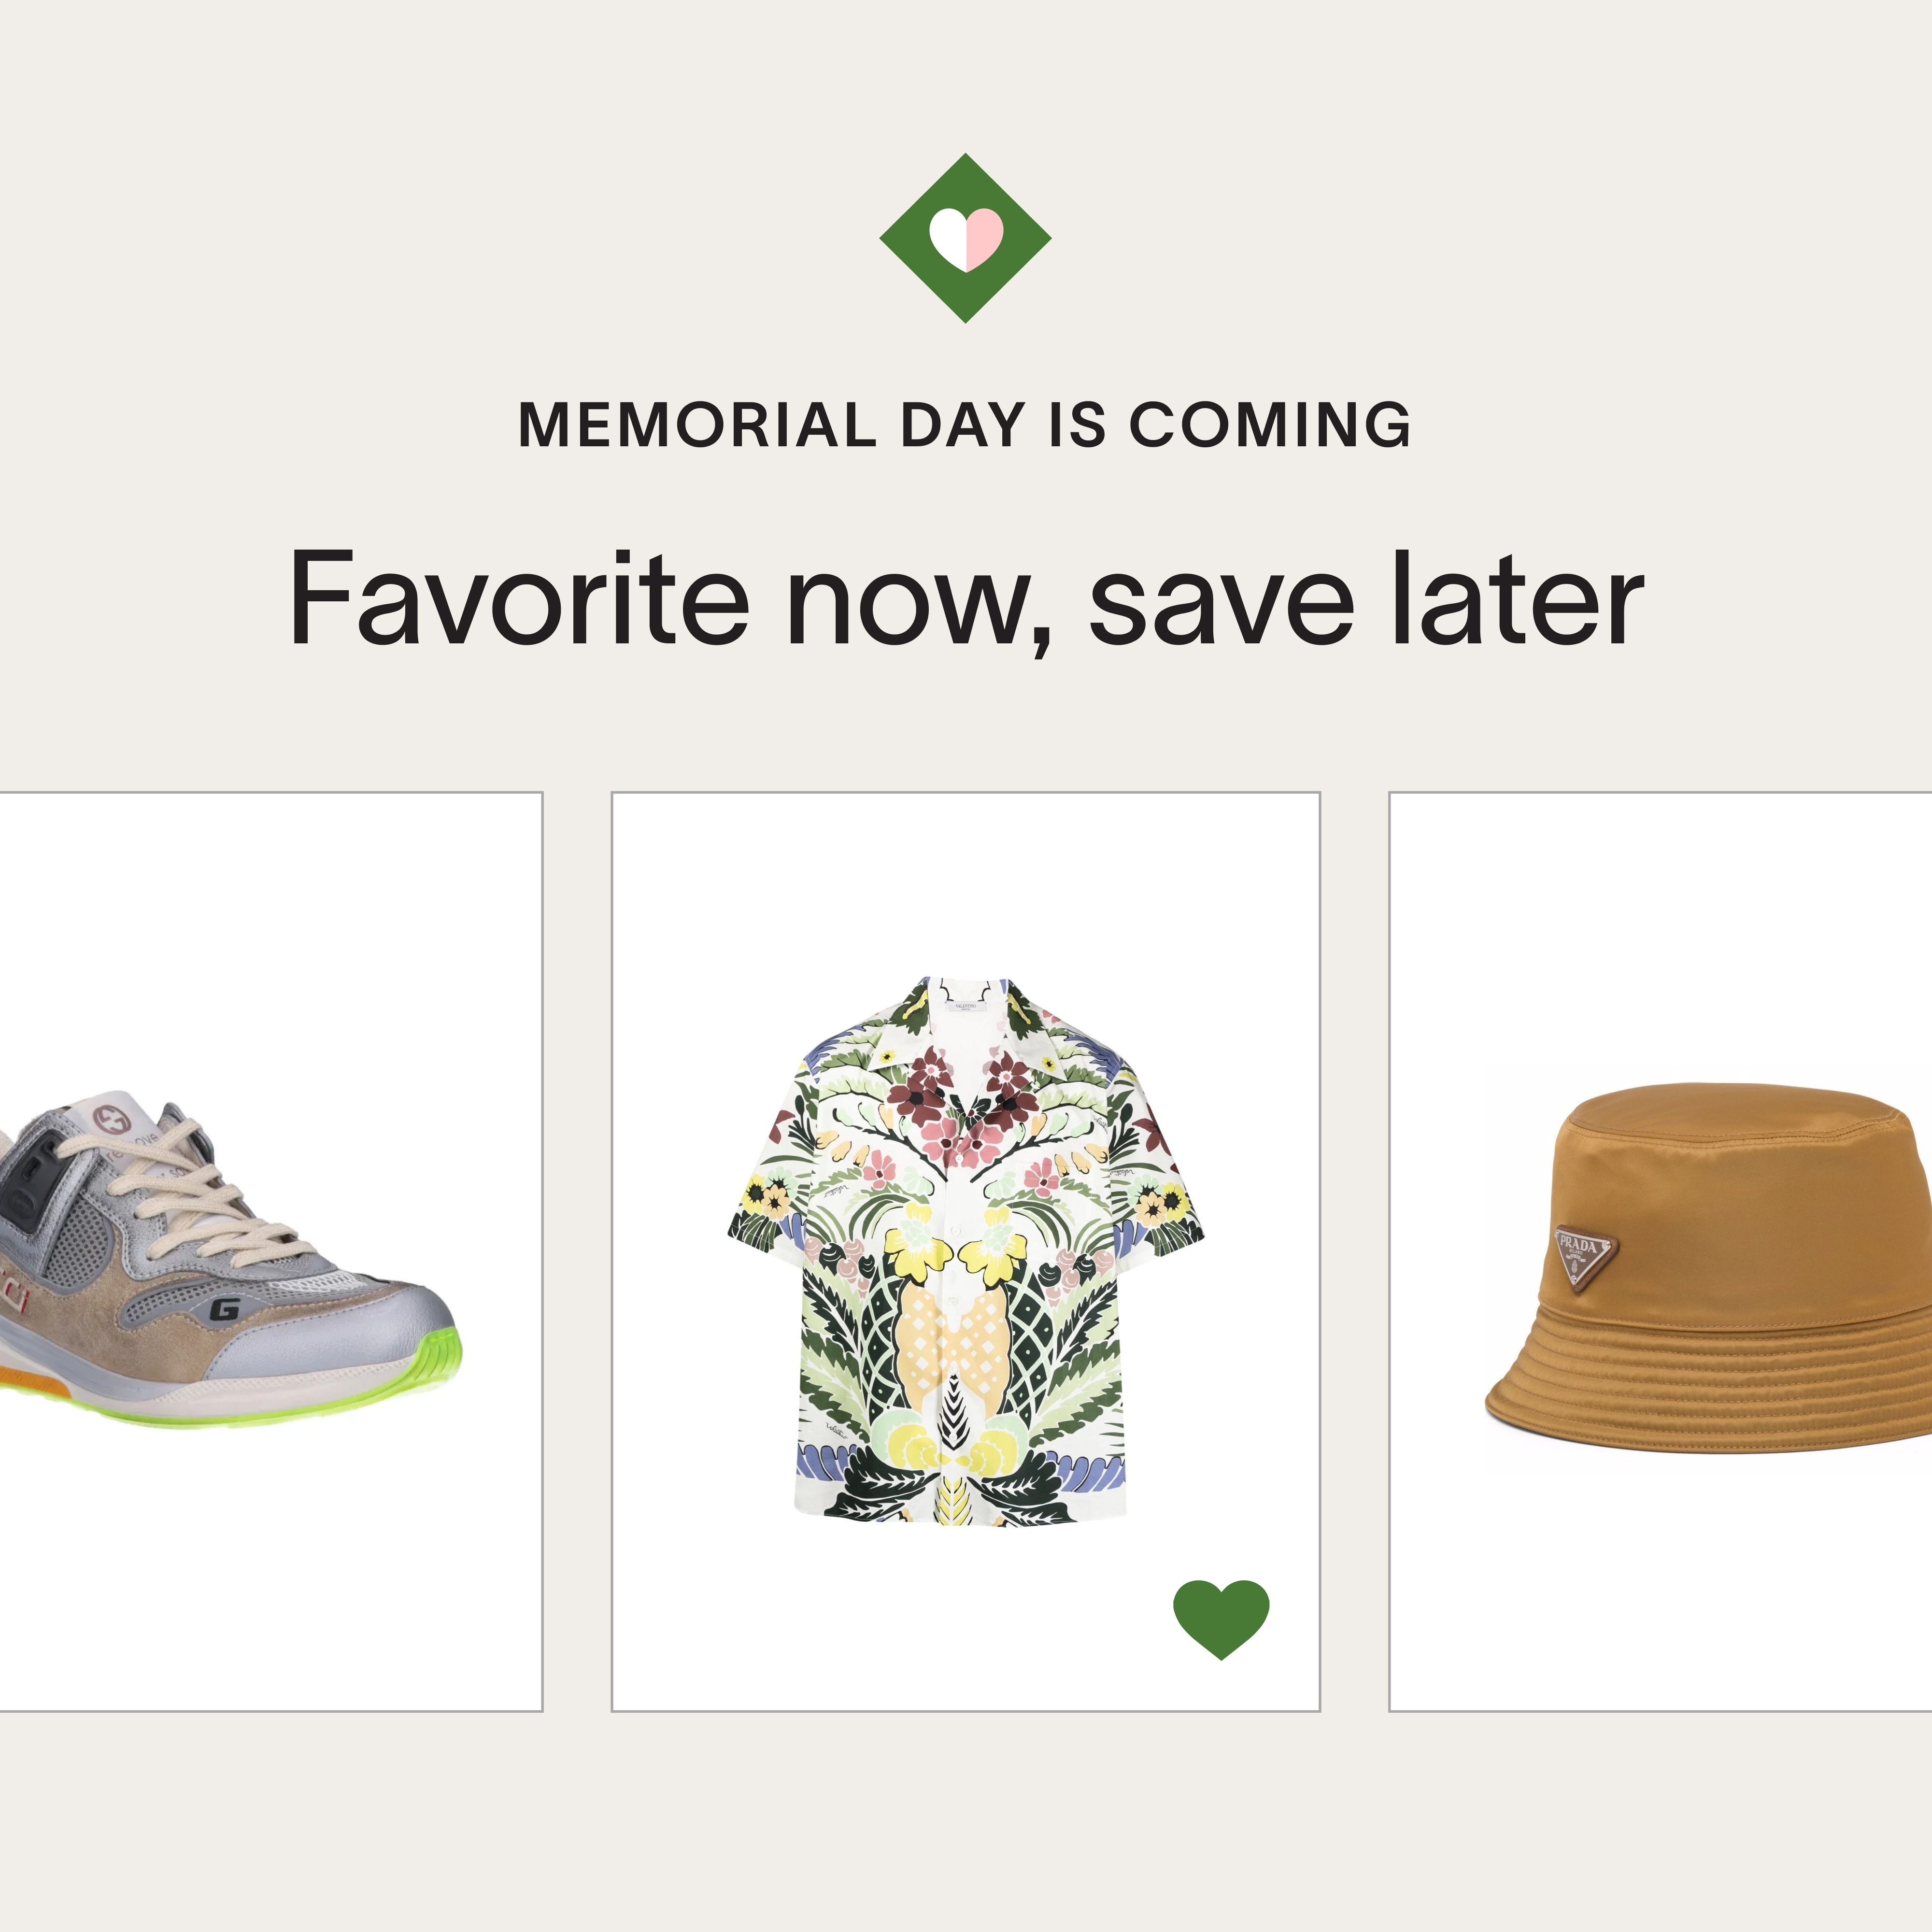 Favorite now, save later: Your Memorial Day shopping guide for men